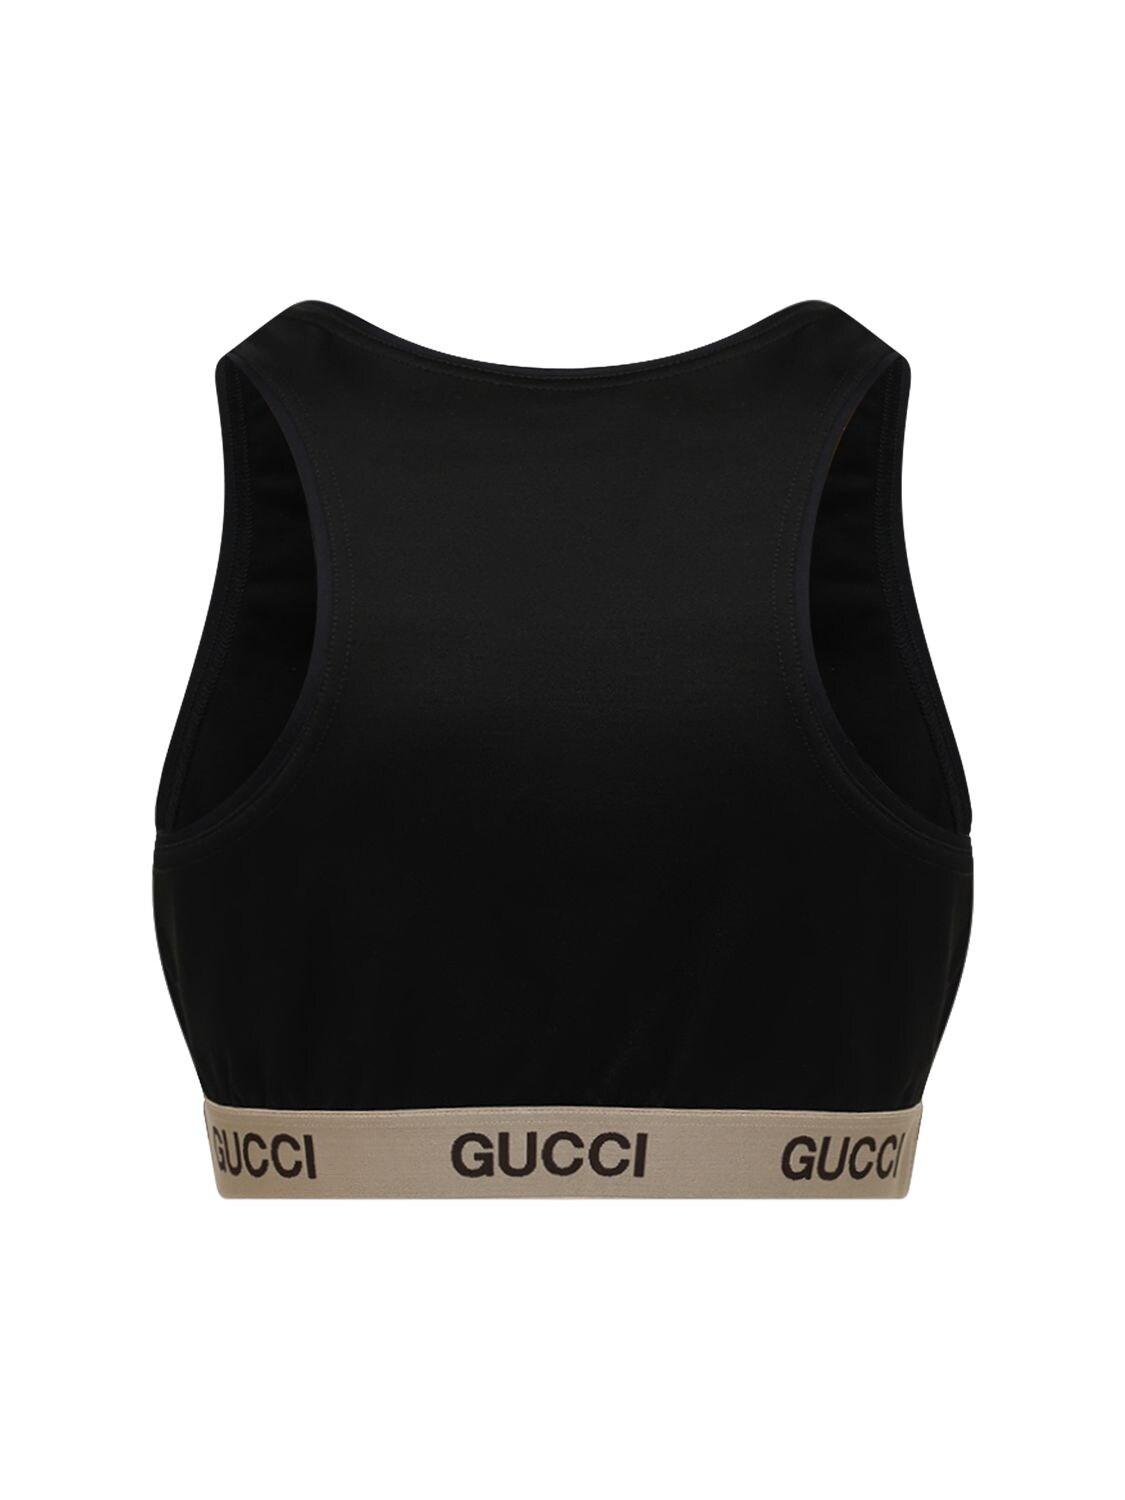 Gucci The North Face Technical Jersey Crop Top in Black | Lyst